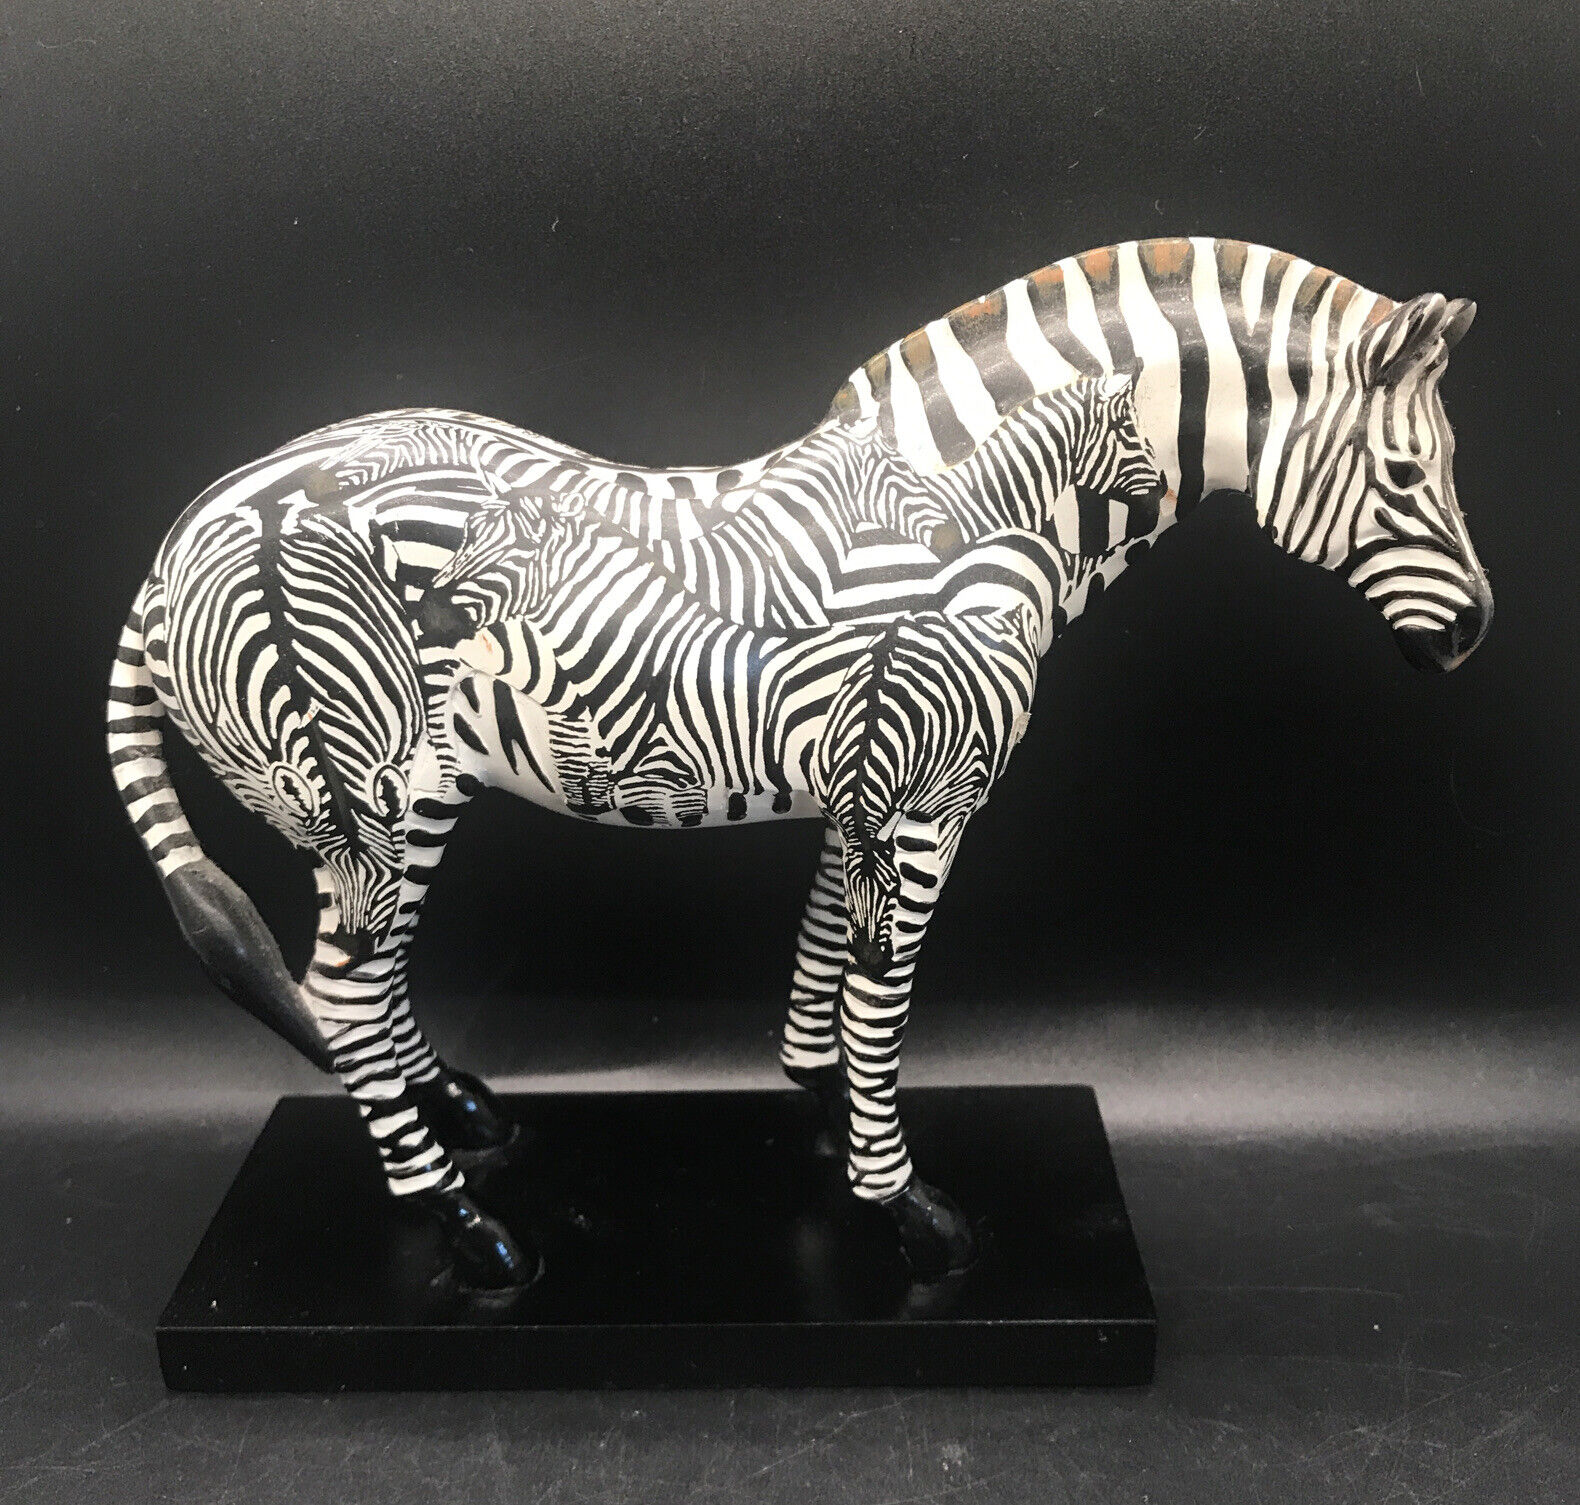 Trail of Painted Ponies Zebra INCOGNITO 3E 6340 2005 - #1524 Janee Hughes